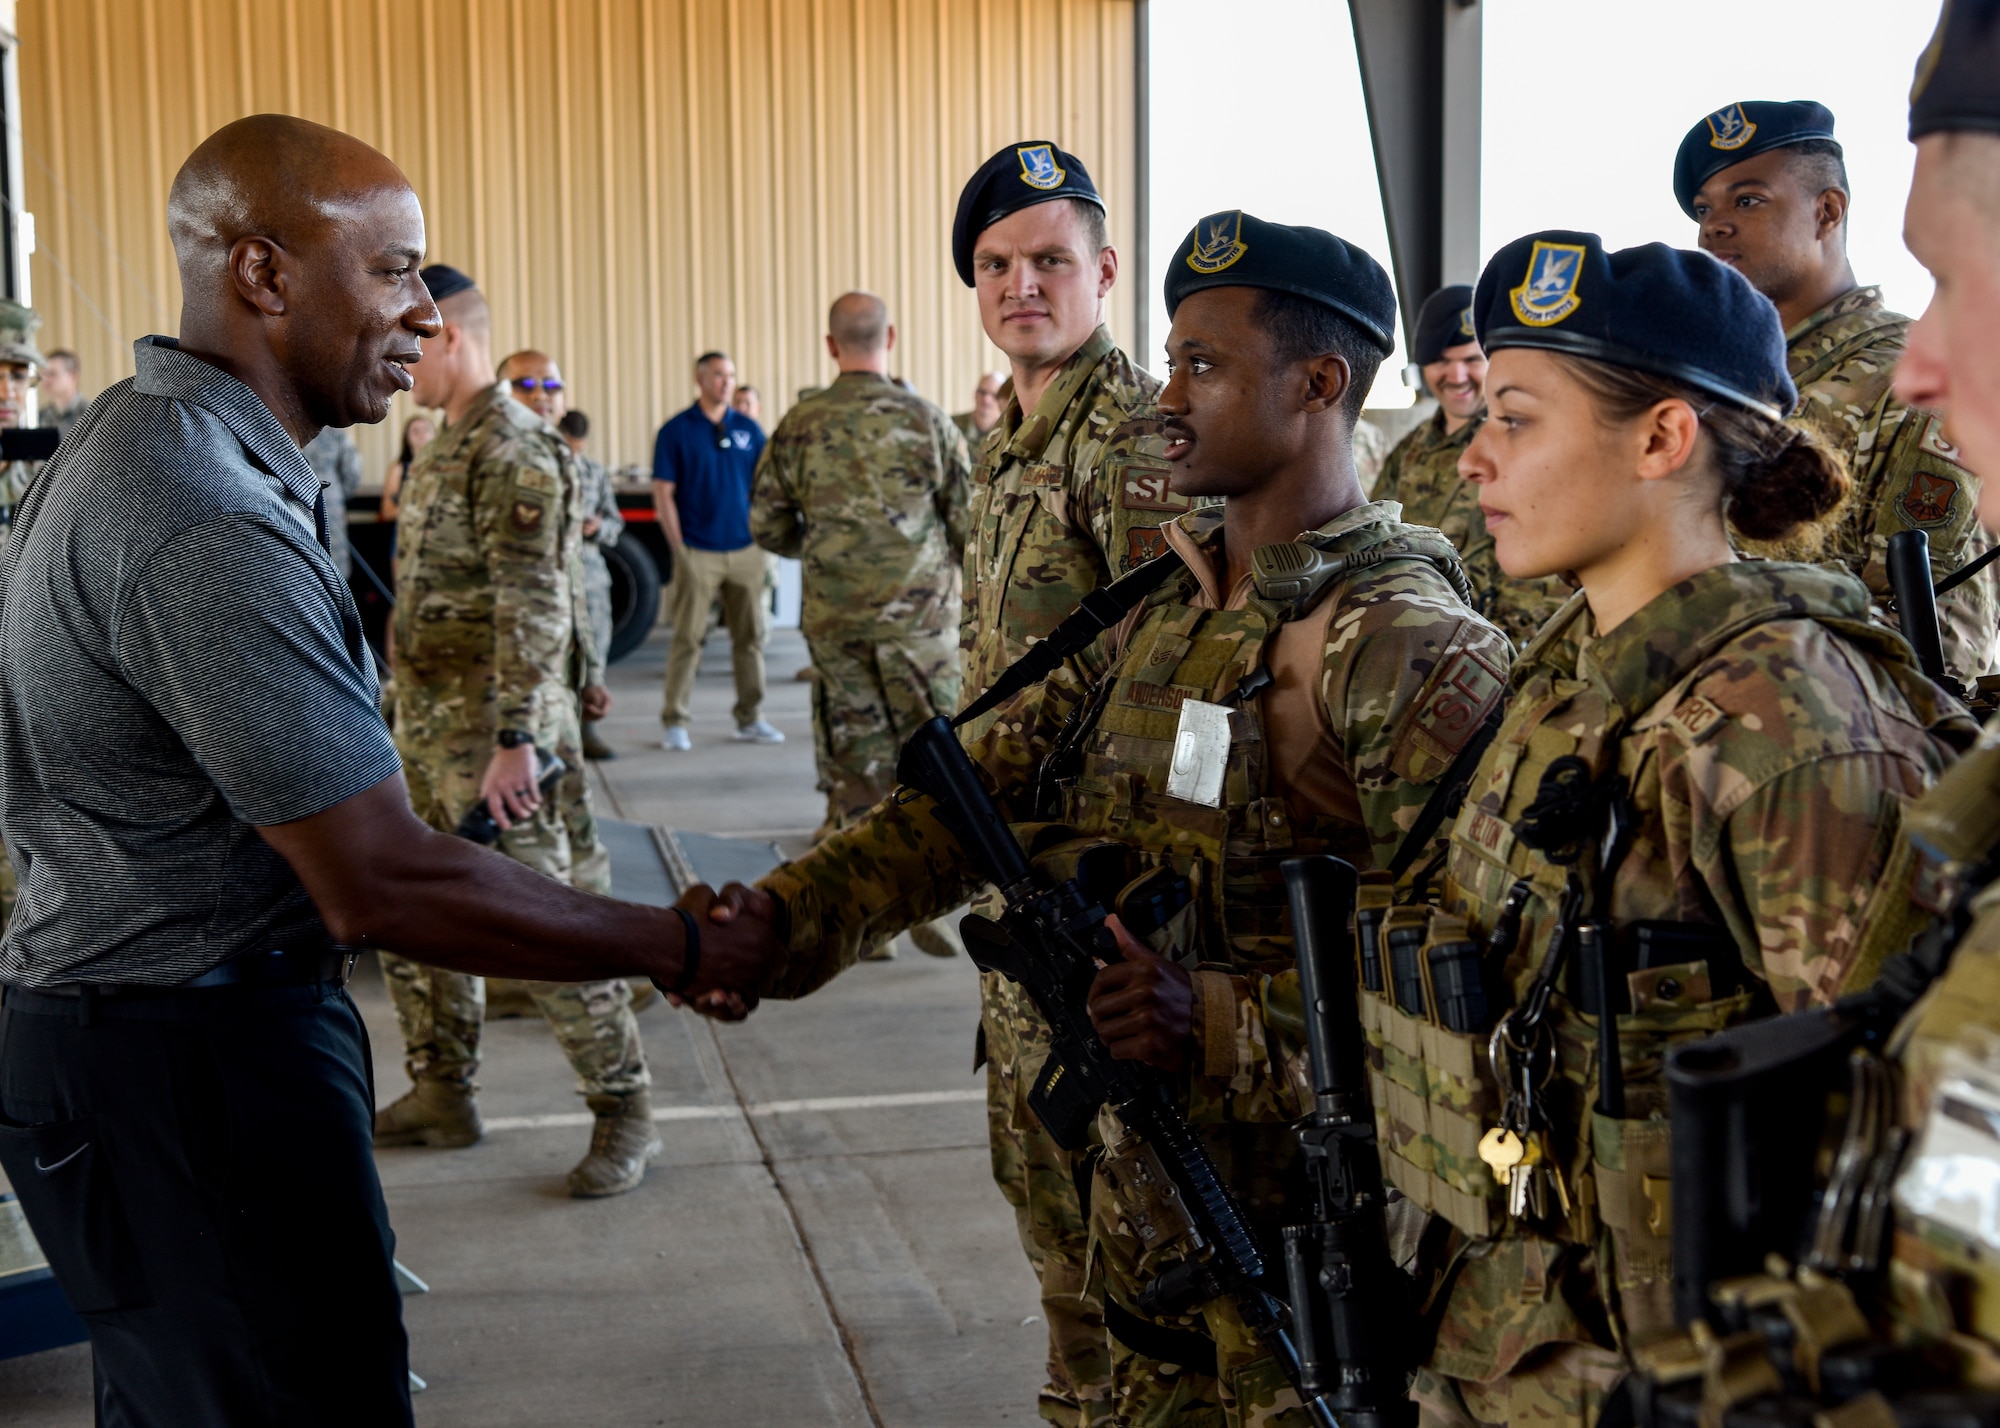 Chief Master Sgt. of the Air Force Kaleth O. Wright meets with Defenders with the 377th Weapons System Security Squadron at Kirtland Air Force Base, N.M., Sept. 28, 2019. During the tour of Kirtland AFB, Wright encouraged Airmen to know their ‘why’ and asked that they make at least two connections with fellow Airmen after he left. (U.S. Air Force photo by Airman 1st Class Austin J. Prisbrey)